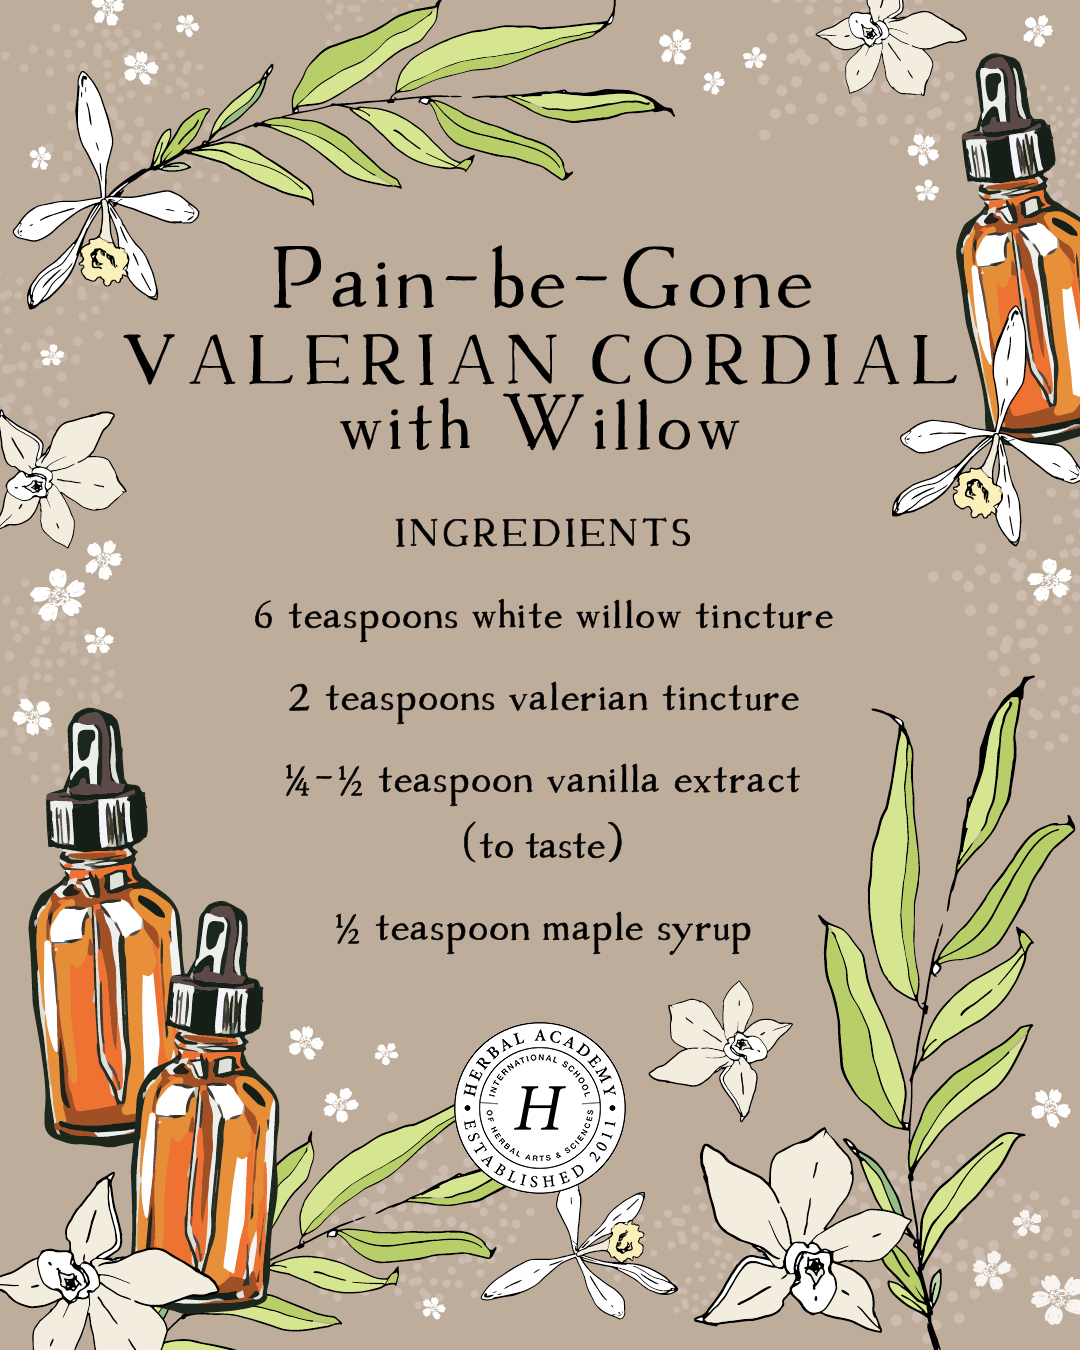 Pain-Be-Gone Valerian Cordial with willow by herbal academy